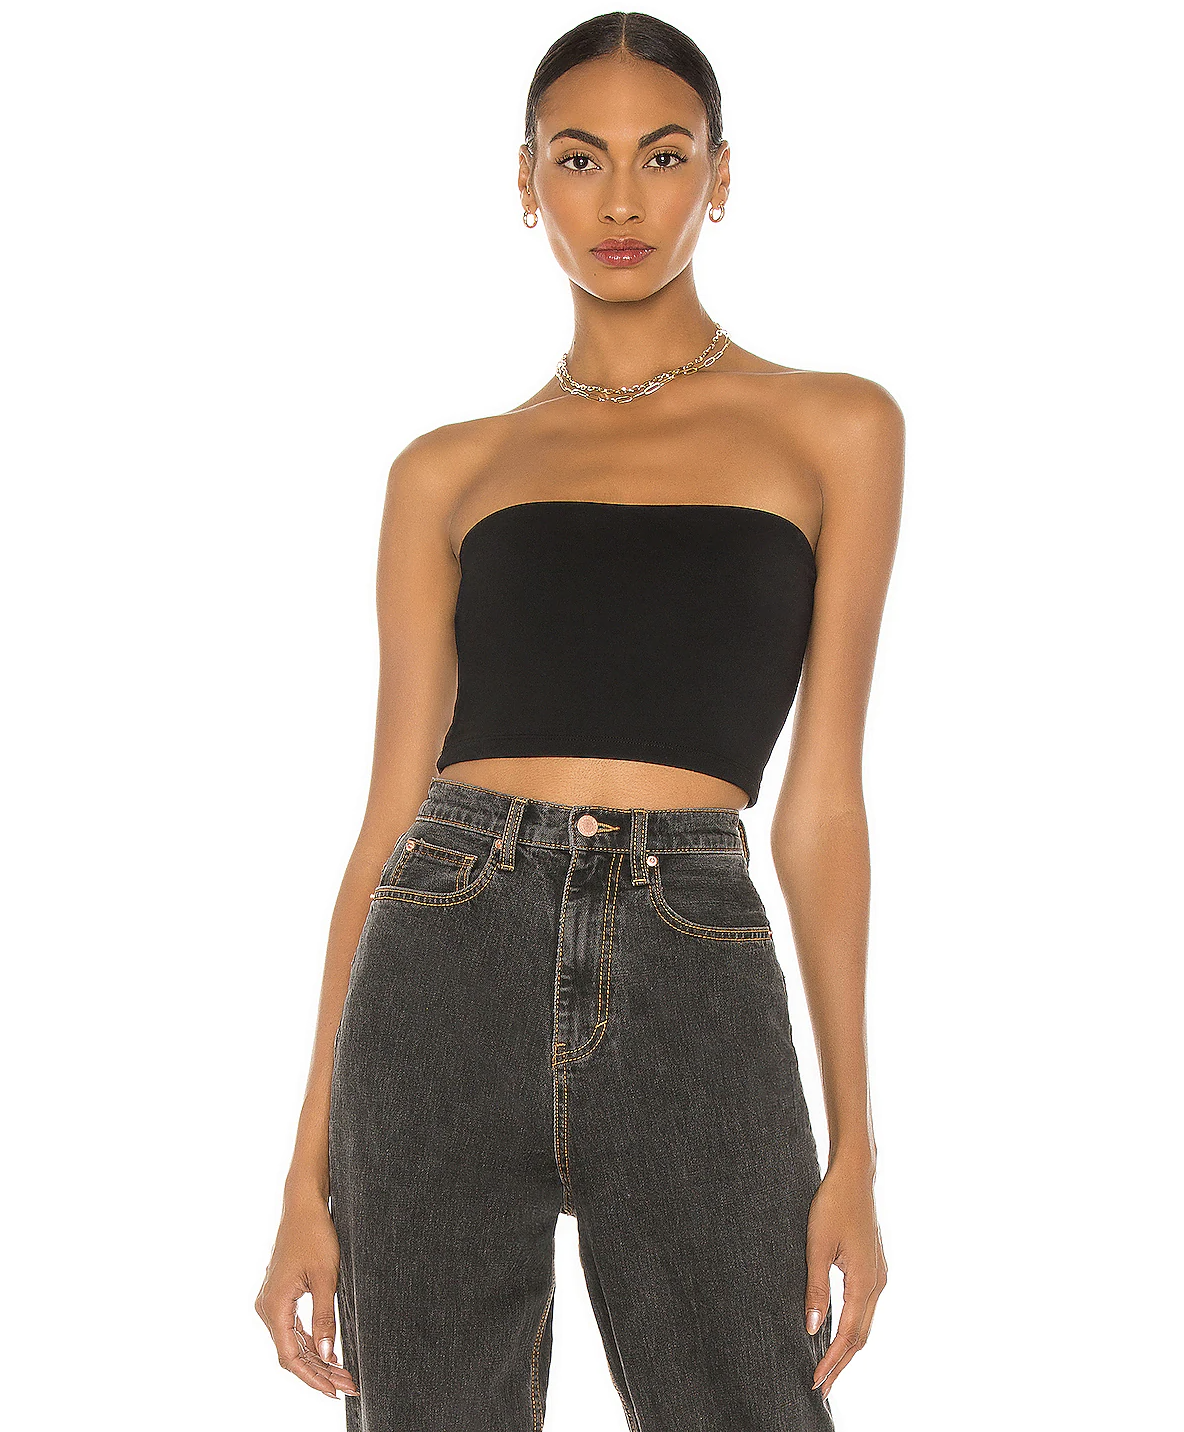 17 Crop Tops That Work for Literally Any Body Type